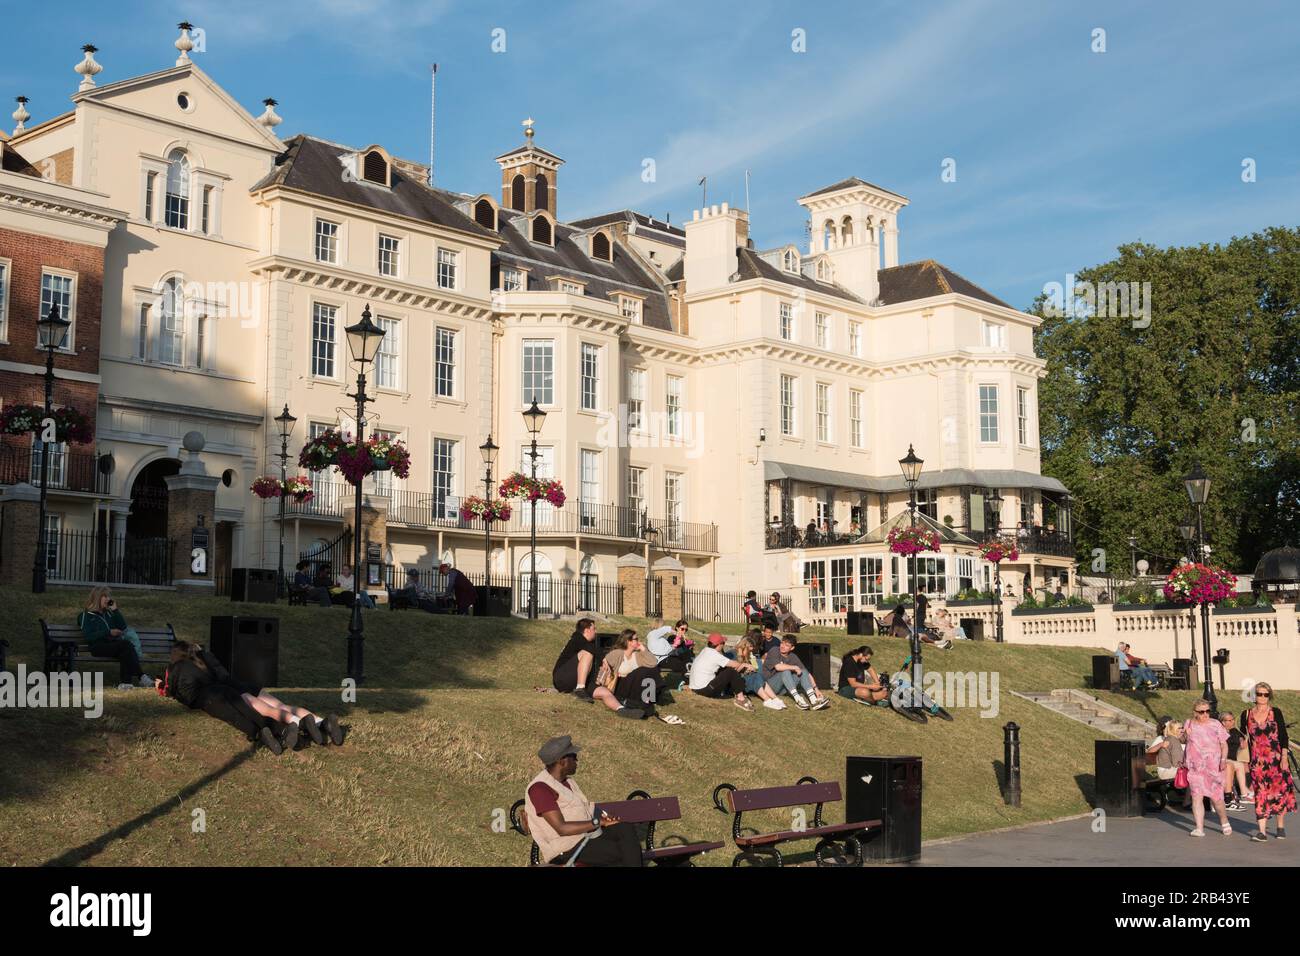 People relaxing in front of the Pitcher & Piano overlooking the River Thames, Richmond Upon Thames, London, England, U.K. Stock Photo